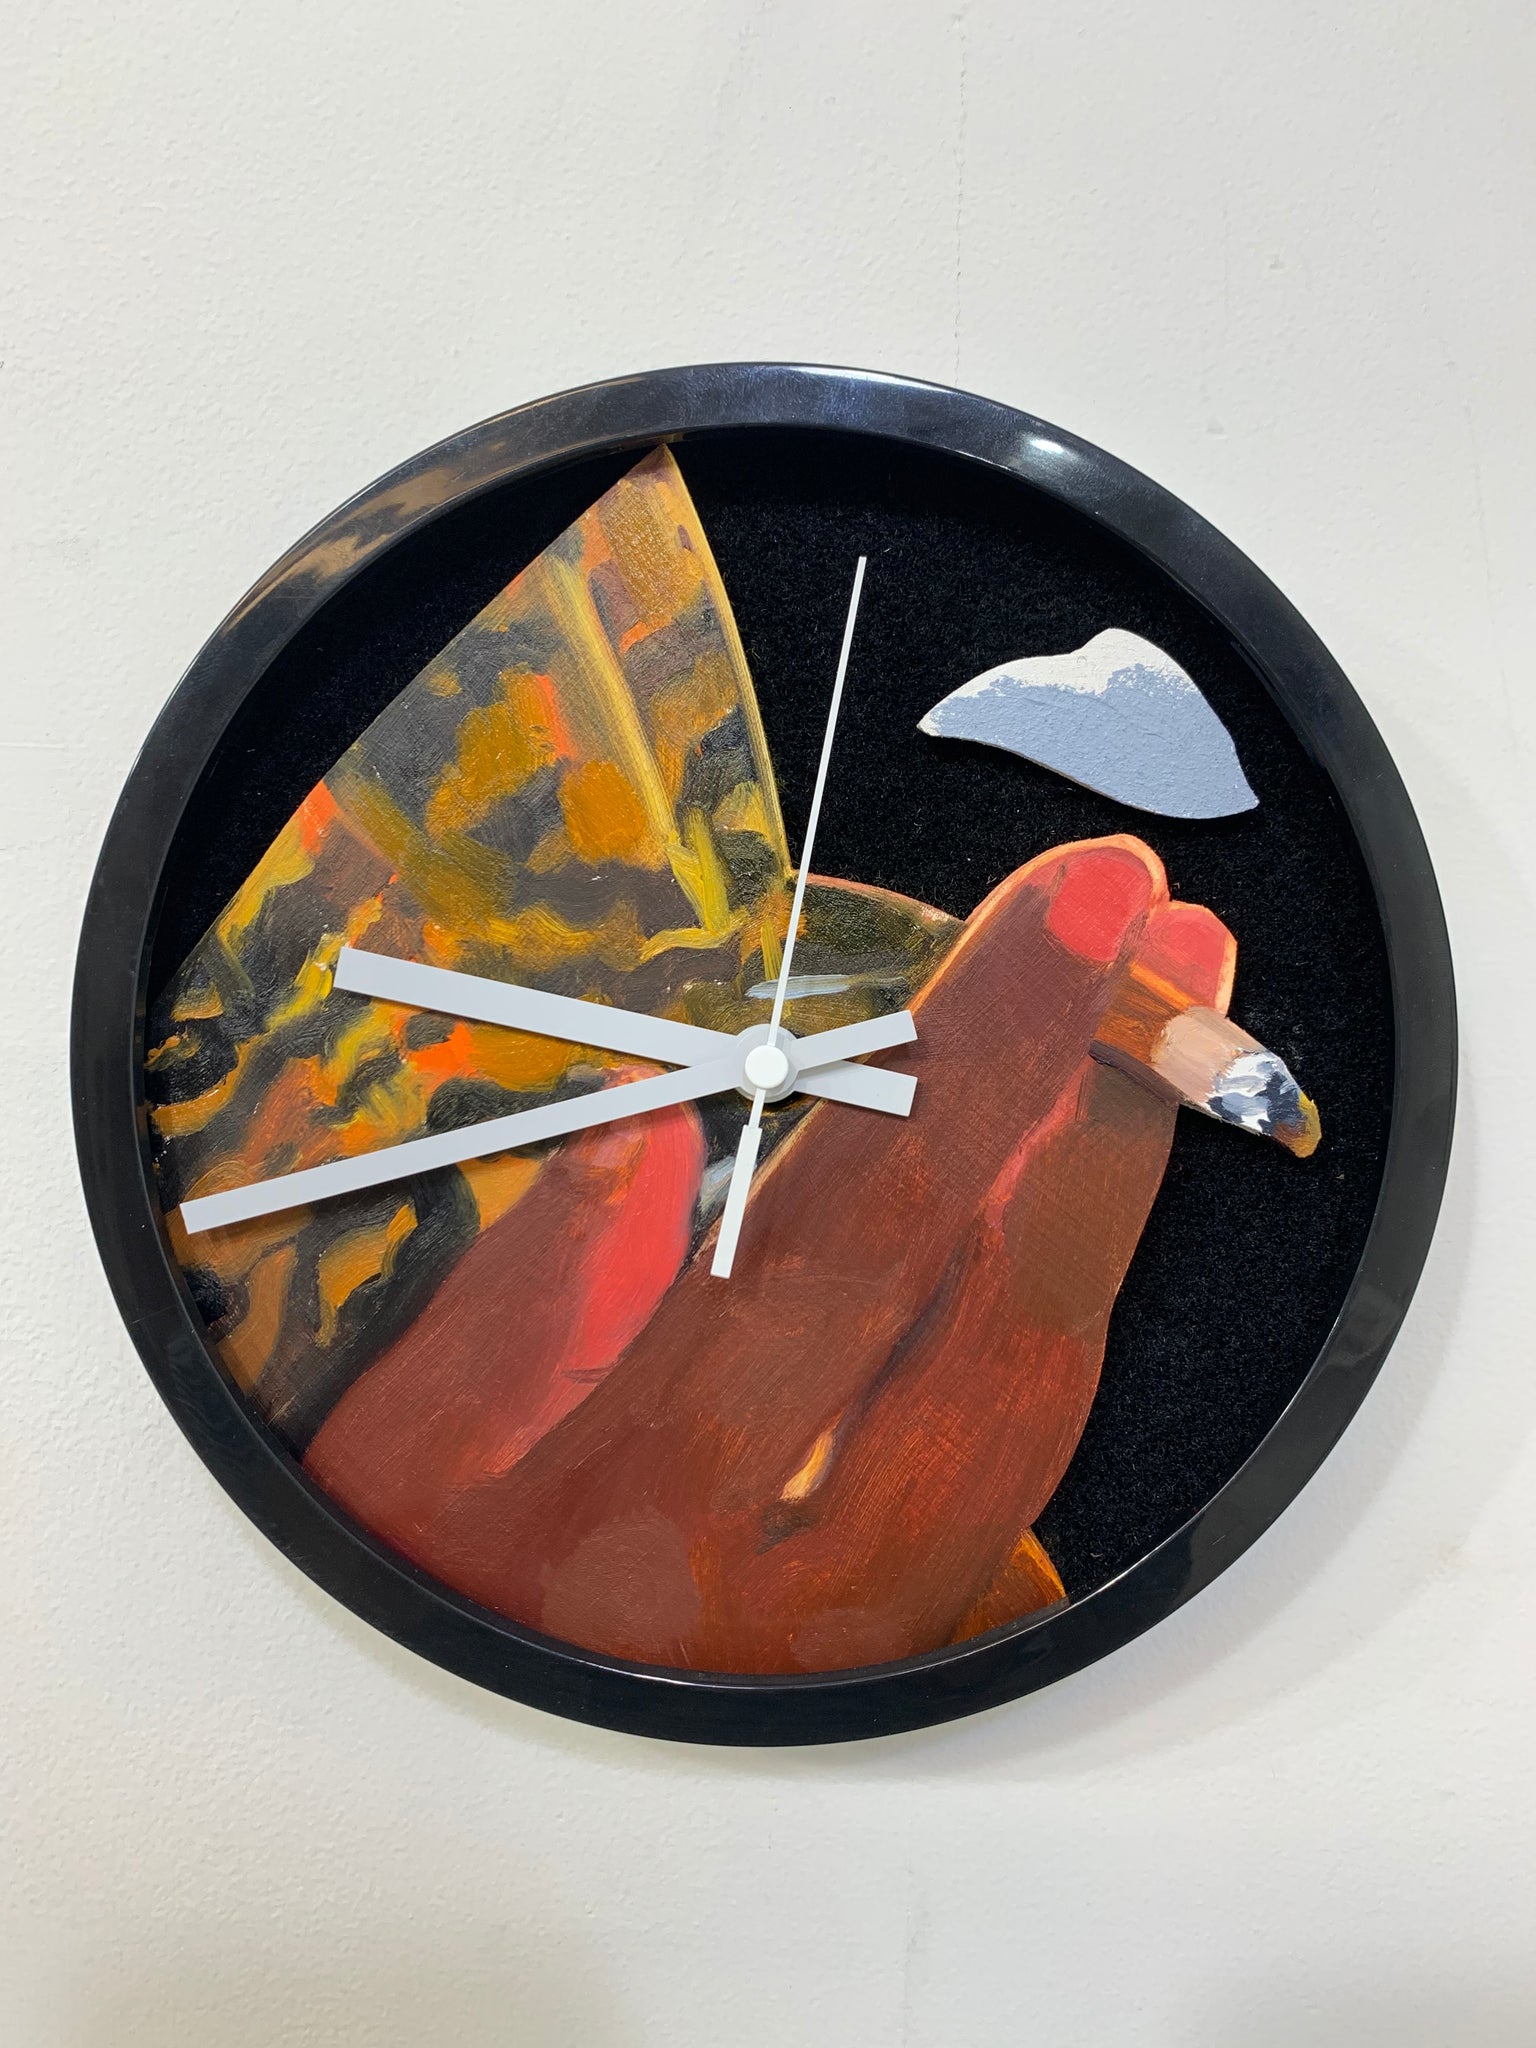 James Williams, "CP Time (Clock Painting)"